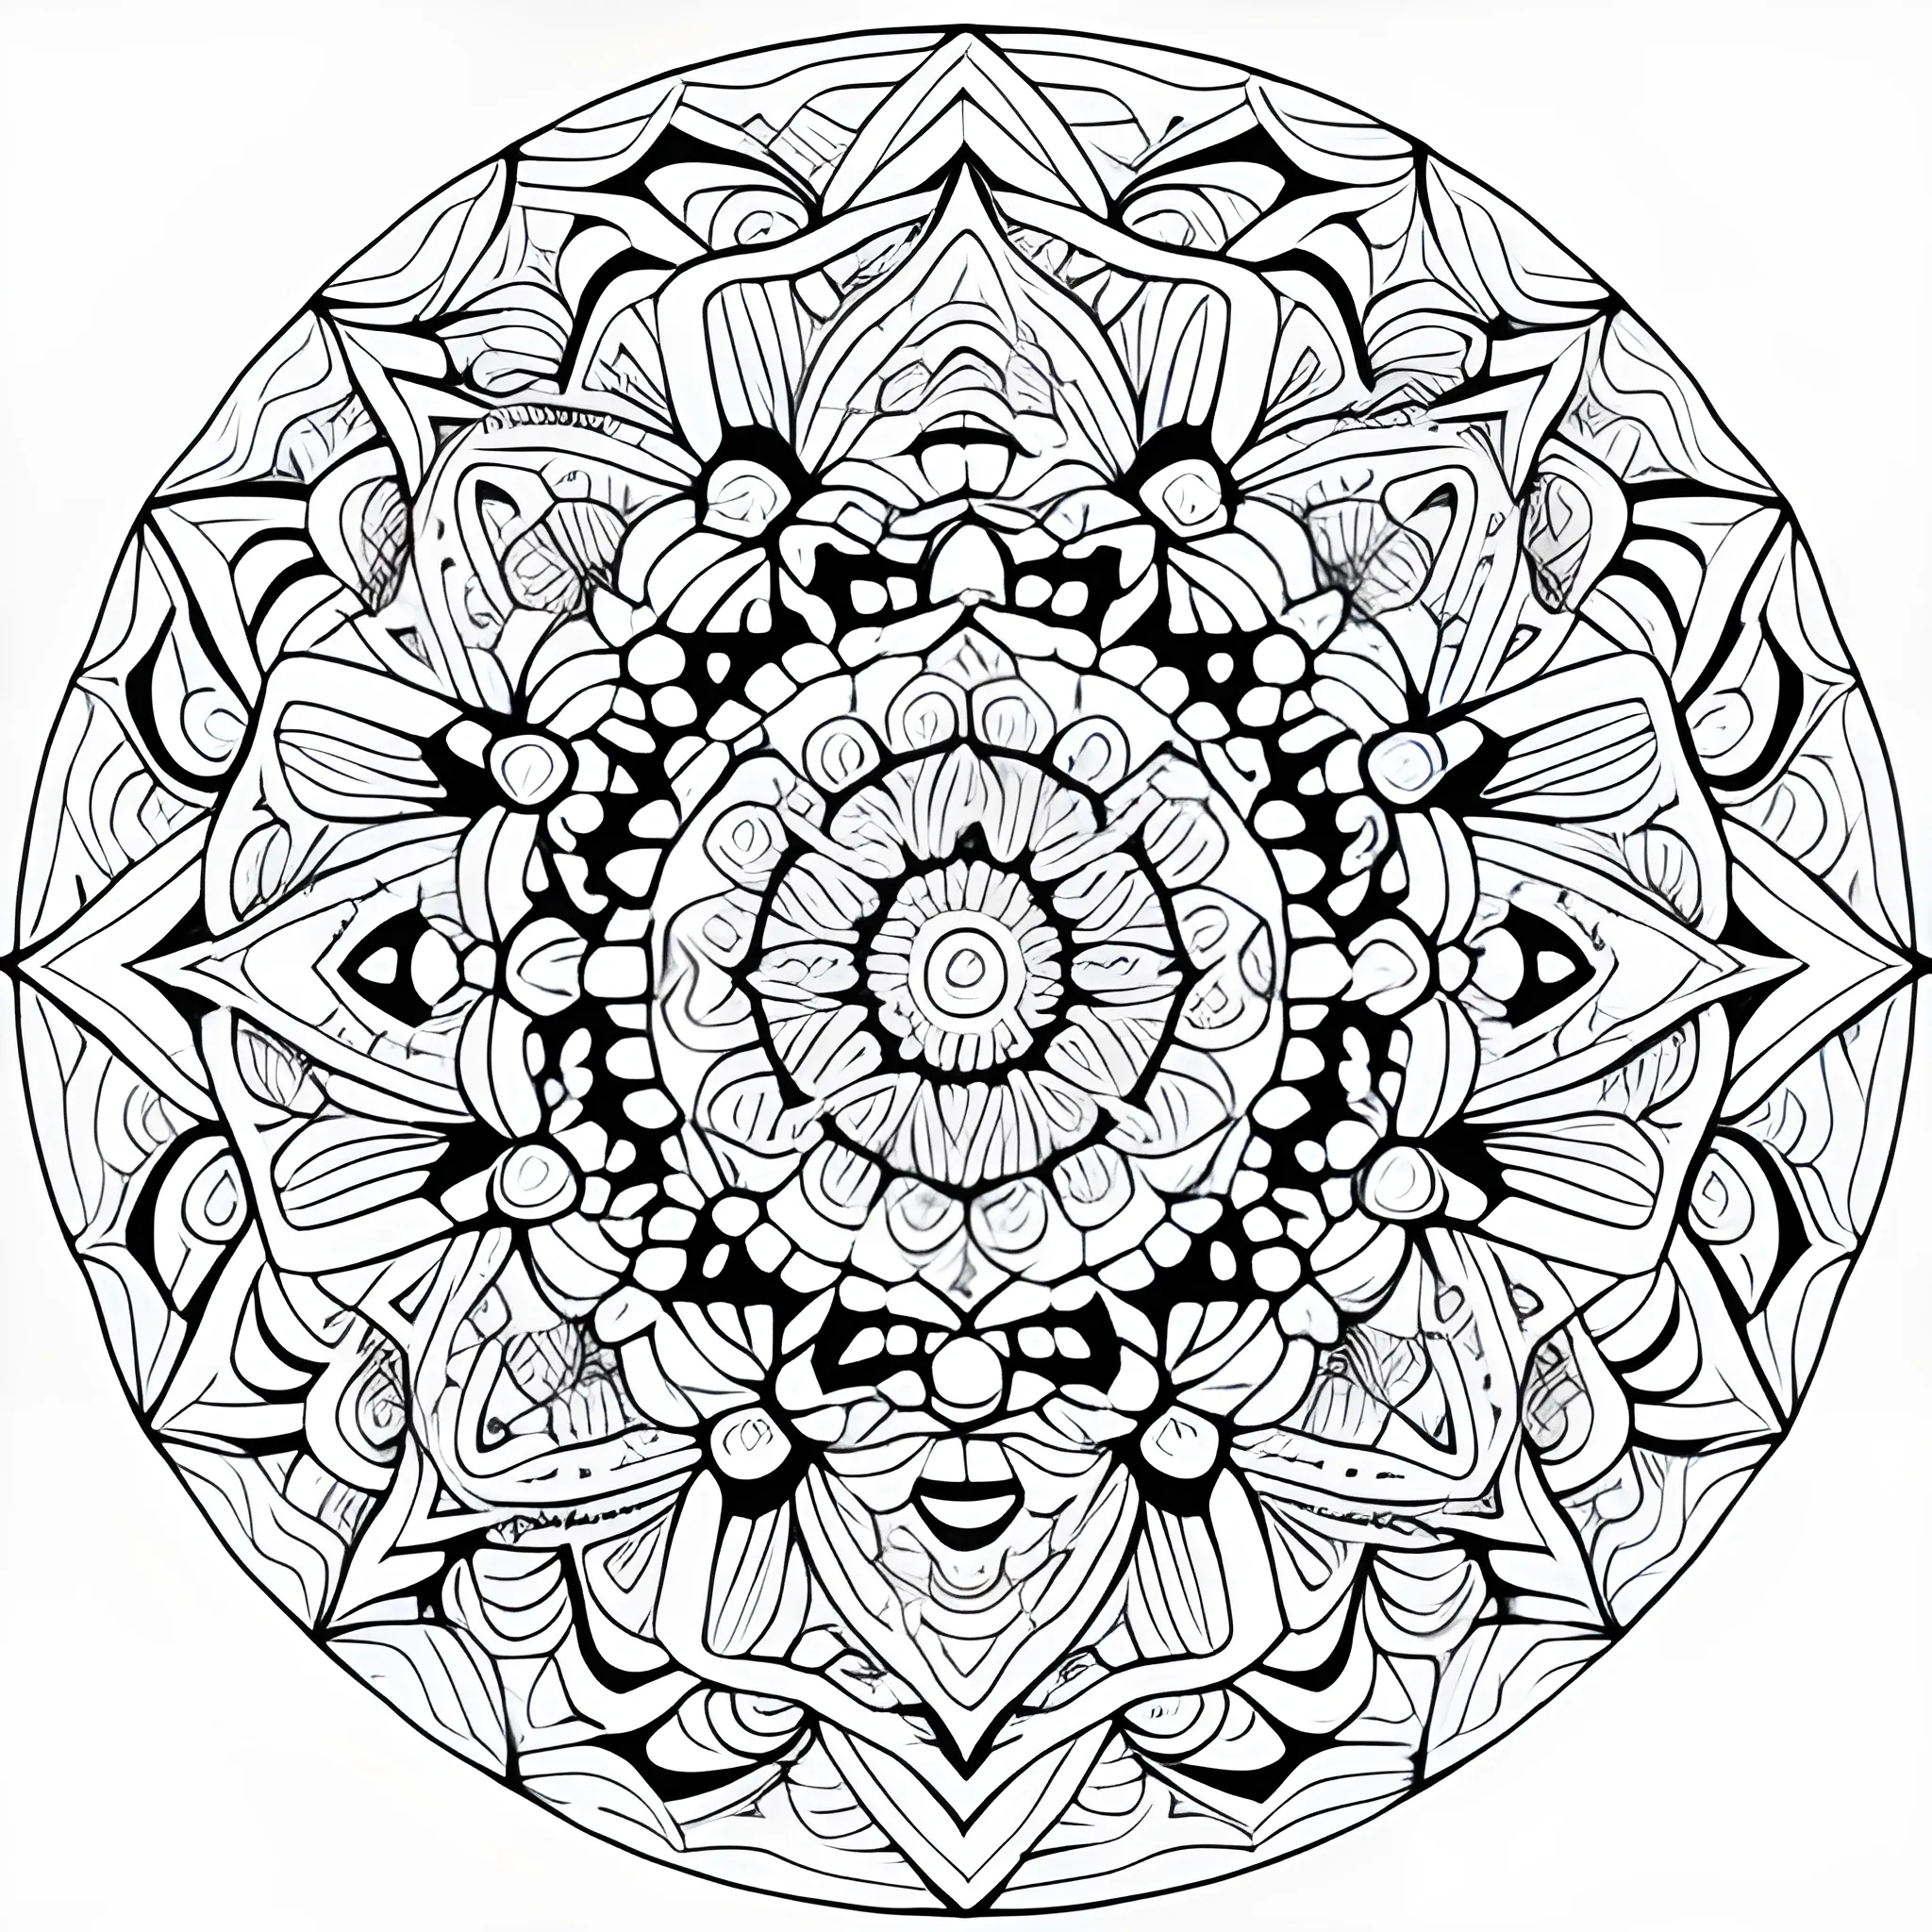 Amazing mandala for a coloring book page inspired in whater, full white with a lot of geometric forms